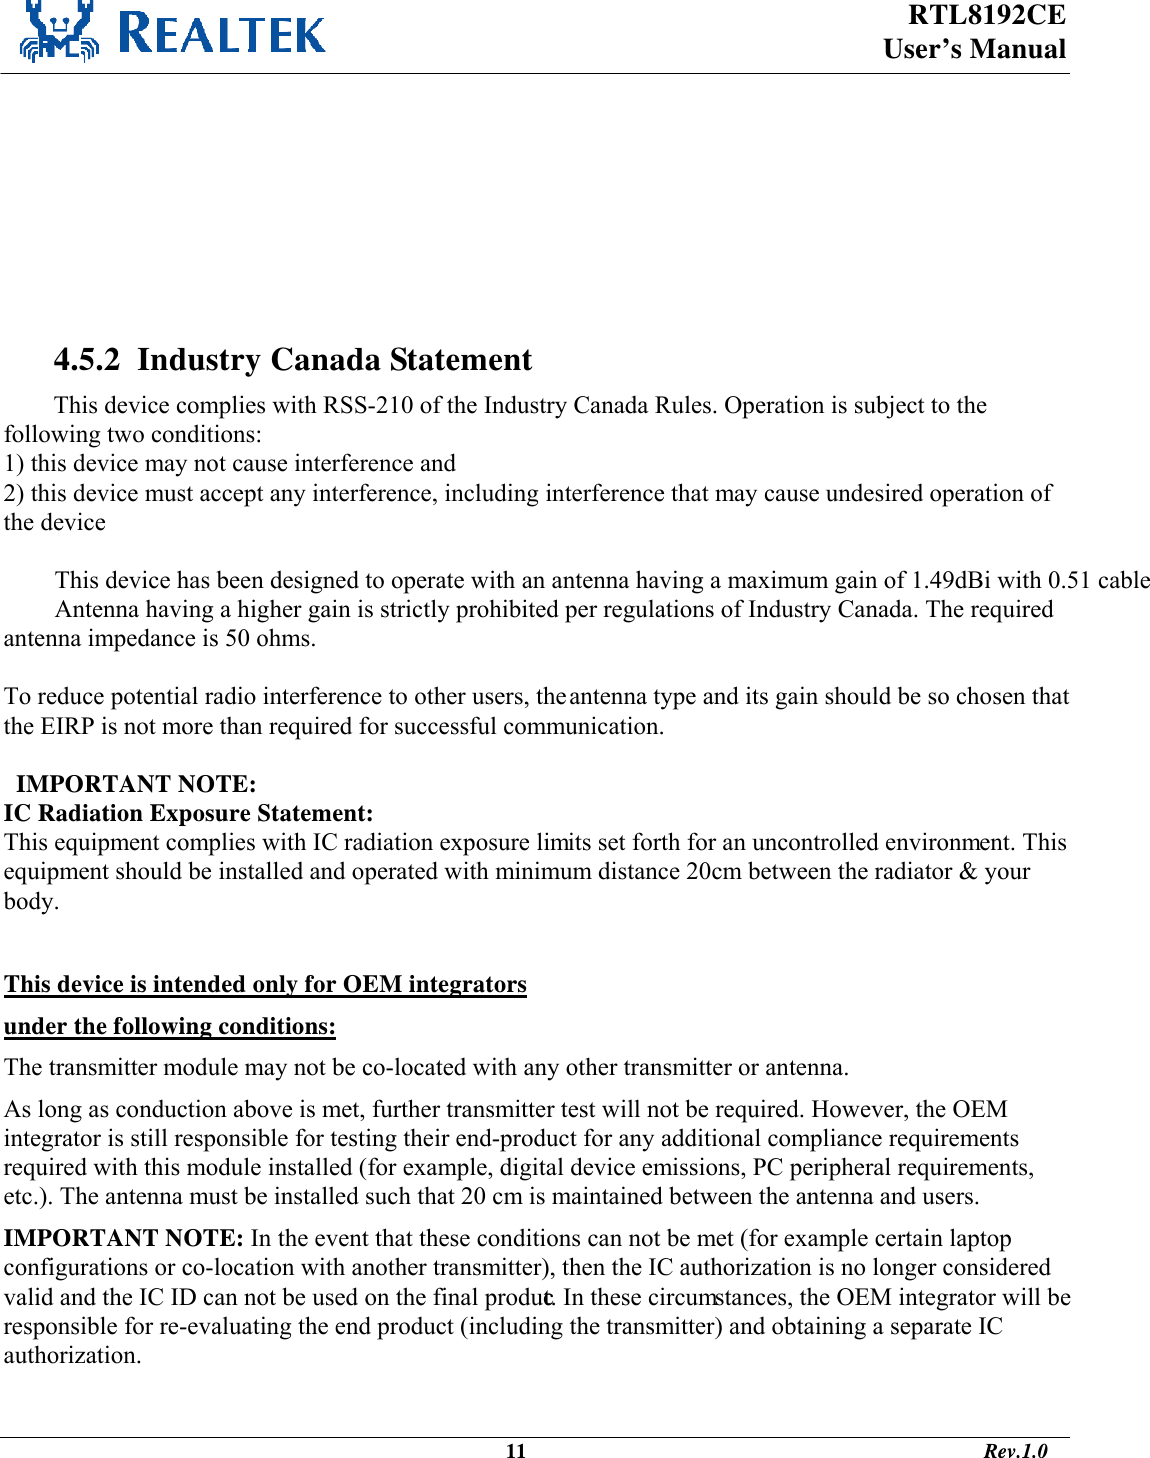  RTL8192CE  User’s Manual     IMPORTANT NOTE: IC Radiation Exposure Statement: This equipment complies with IC radiation exposure limits set forth for an uncontrolled environment. This equipment should be installed and operated with minimum distance 20cm between the radiator &amp; your body.    4.5.2  Industry Canada Statement This device complies with RSS-210 of the Industry Canada Rules. Operation is subject to the following two conditions: 1) this device may not cause interference and 2) this device must accept any interference, including interference that may cause undesired operation of the device  This device has been designed to operate with an antenna having a maximum gain of 1.49dBi with 0.51 cable loss. Antenna having a higher gain is strictly prohibited per regulations of Industry Canada. The required antenna impedance is 50 ohms.  To reduce potential radio interference to other users, the antenna type and its gain should be so chosen that the EIRP is not more than required for successful communication.    IMPORTANT NOTE: IC Radiation Exposure Statement: This equipment complies with IC radiation exposure limits set forth for an uncontrolled environment. This equipment should be installed and operated with minimum distance 20cm between the radiator &amp; your body.  This device is intended only for OEM integrators  under the following conditions: The transmitter module may not be co-located with any other transmitter or antenna. As long as conduction above is met, further transmitter test will not be required. However, the OEM integrator is still responsible for testing their end-product for any additional compliance requirements required with this module installed (for example, digital device emissions, PC peripheral requirements, etc.). The antenna must be installed such that 20 cm is maintained between the antenna and users. IMPORTANT NOTE: In the event that these conditions can not be met (for example certain laptop configurations or co-location with another transmitter), then the IC authorization is no longer considered valid and the IC ID can not be used on the final product. In these circumstances, the OEM integrator will be responsible for re-evaluating the end product (including the transmitter) and obtaining a separate IC authorization.                                                                                              11                                                                                       Rev.1.0 